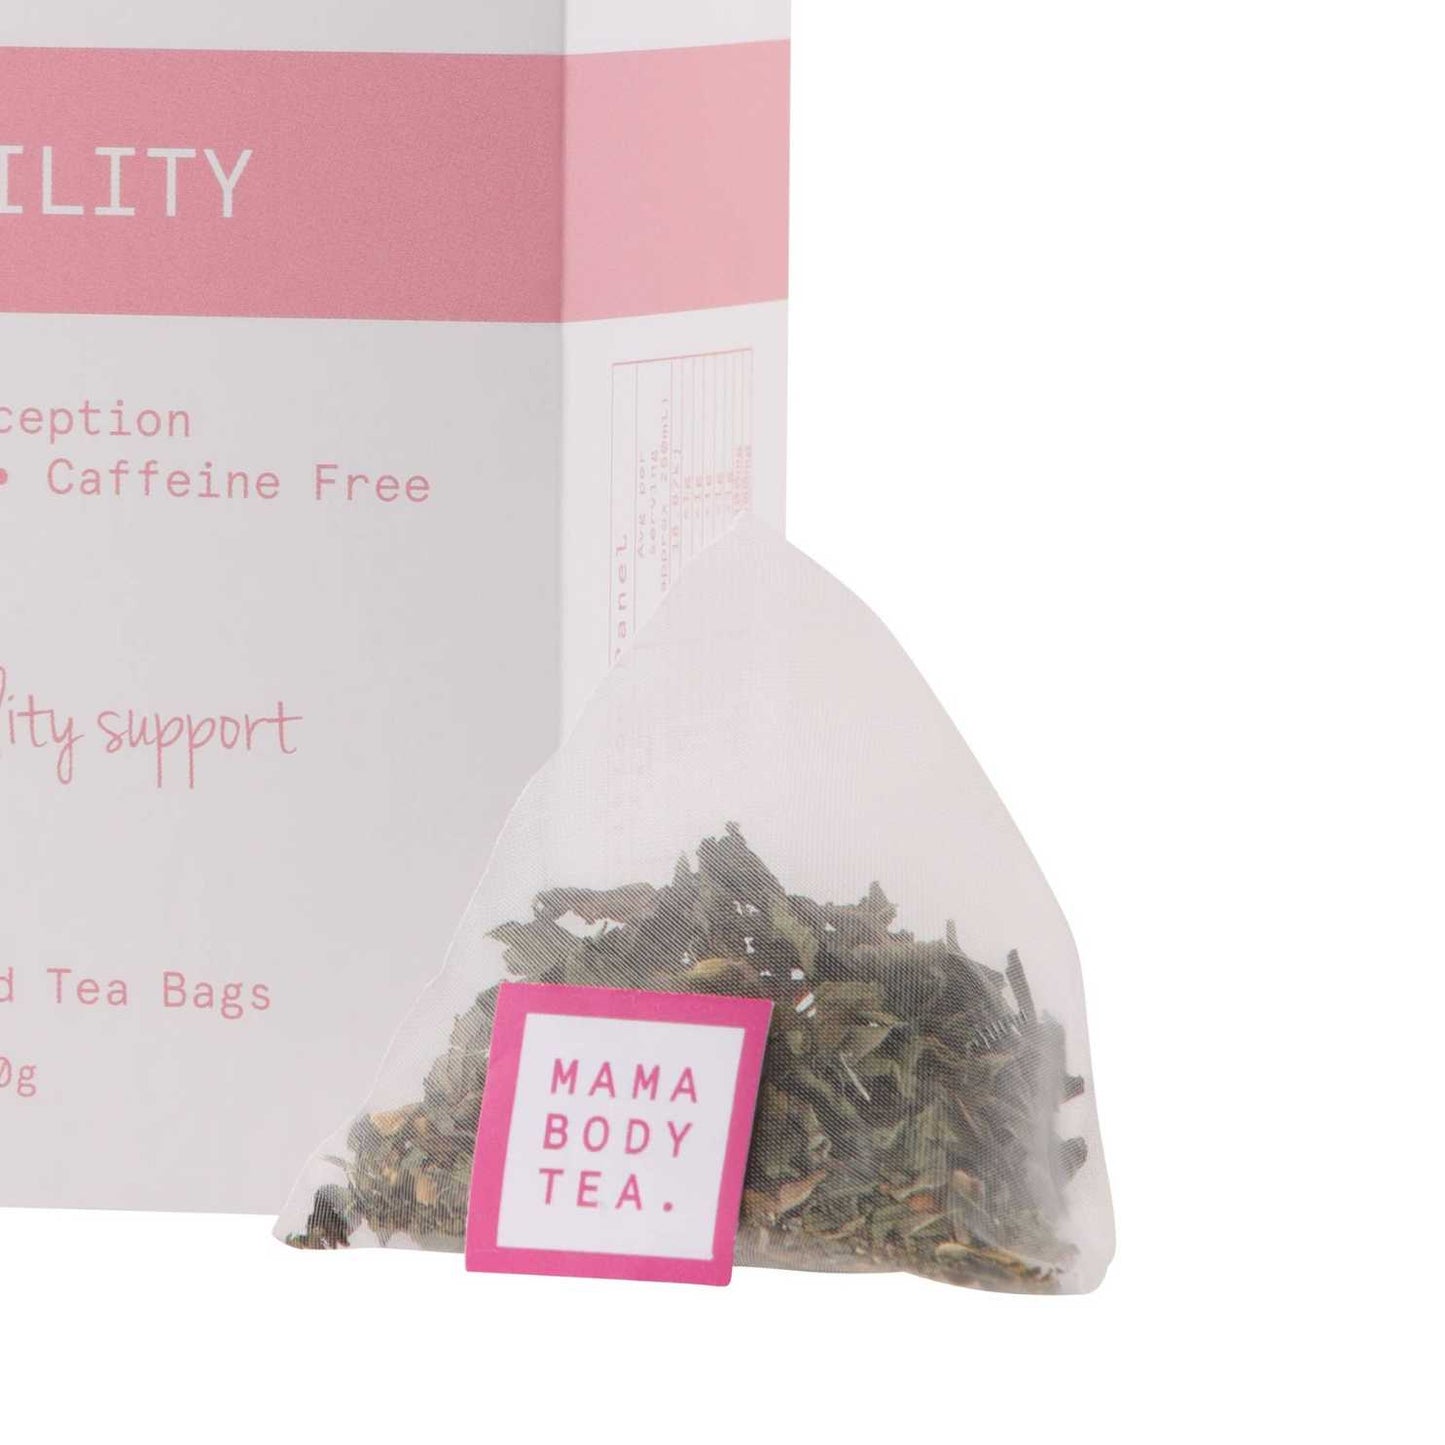 Close-up image of a pyramid-shaped fertility tea bag from Mama Body Tea, designed to support hormonal balance and fertility, against a backdrop of the Mama Body Tea brand logo.  tea includes, Organic Raspberry Dong, Quai Root, Shativari Root, Tulsi, Skullcap